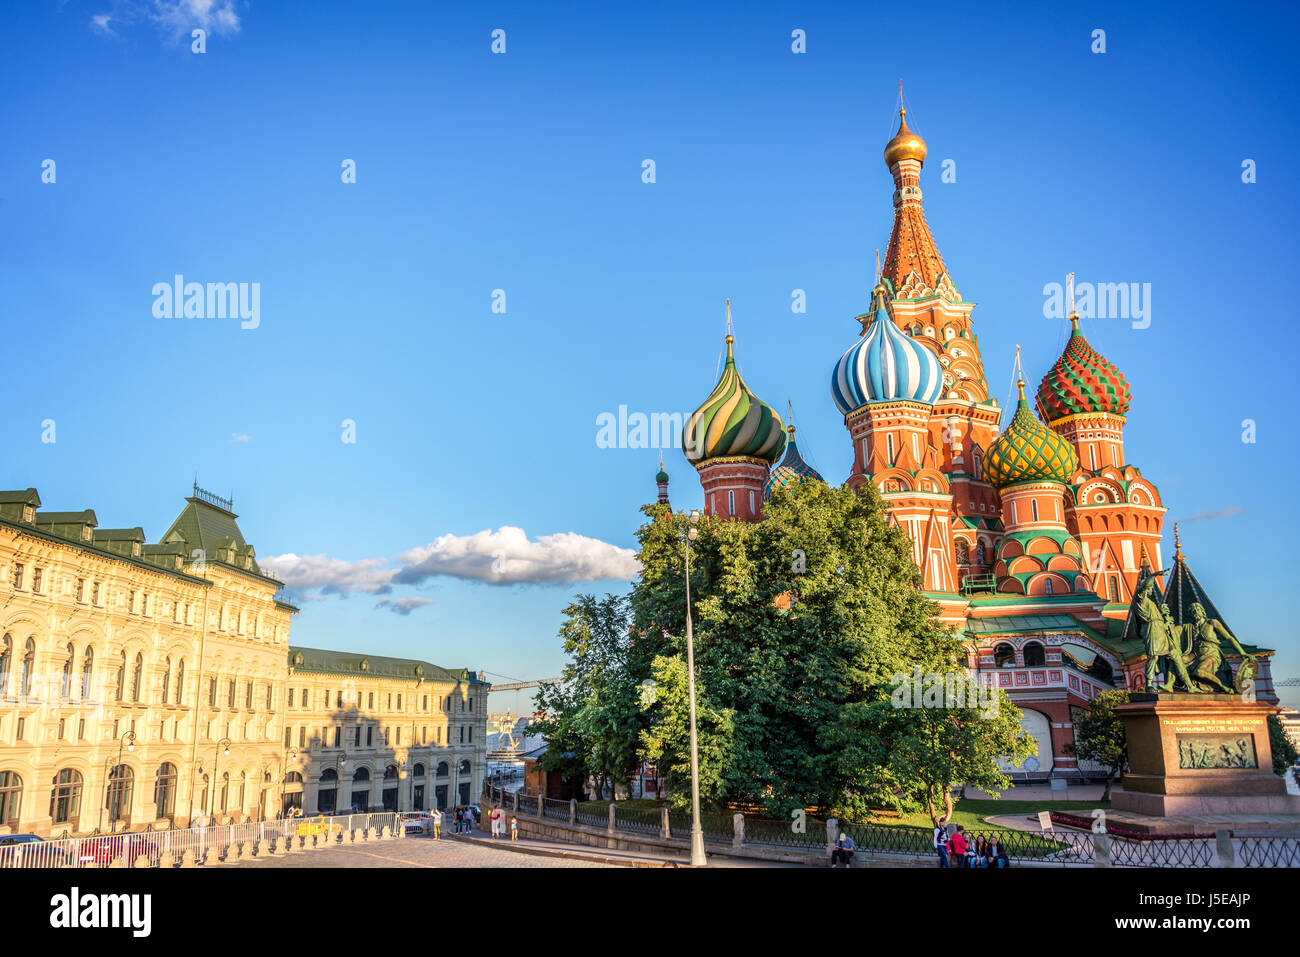 St Basil's cathedral on Red Square, Moscow, Russia Stock Photo